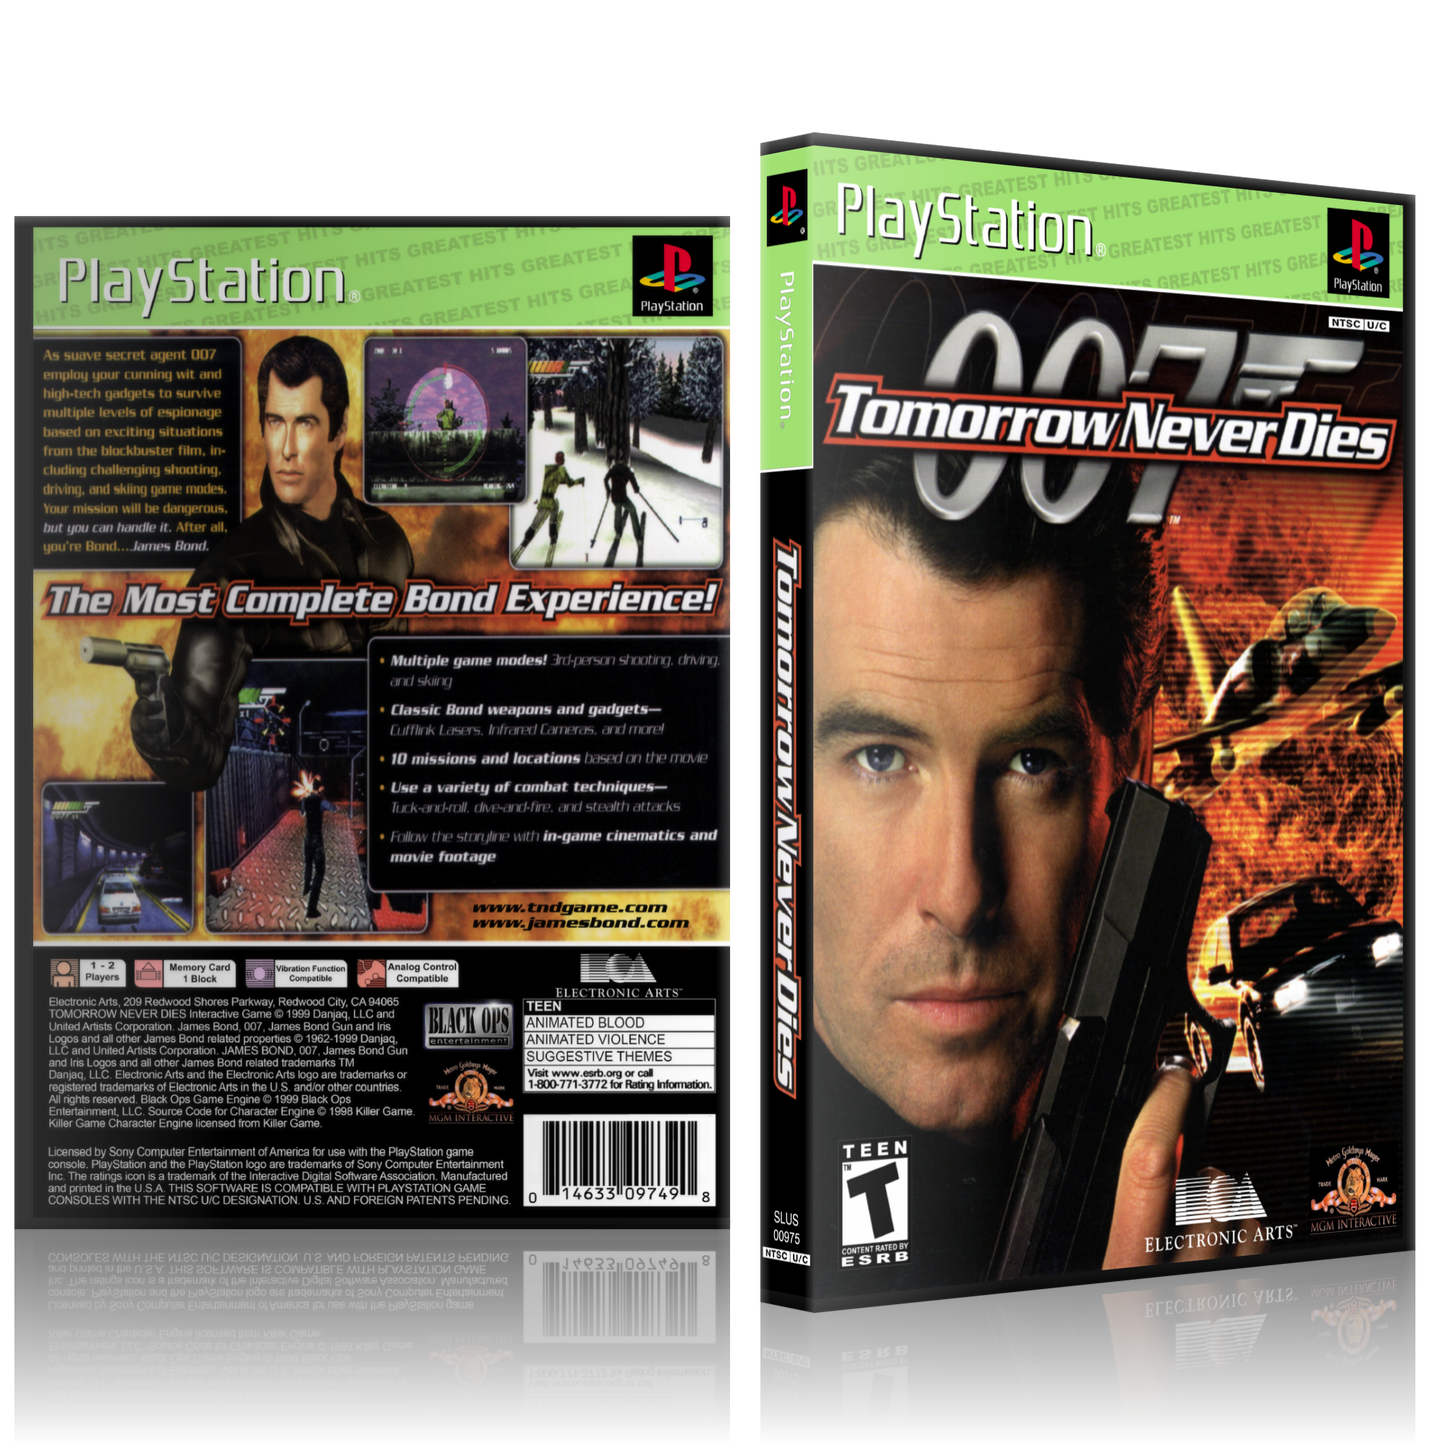 PS1 Case - NO GAME - 007 Tomorrow Never Dies - Greatest Hits